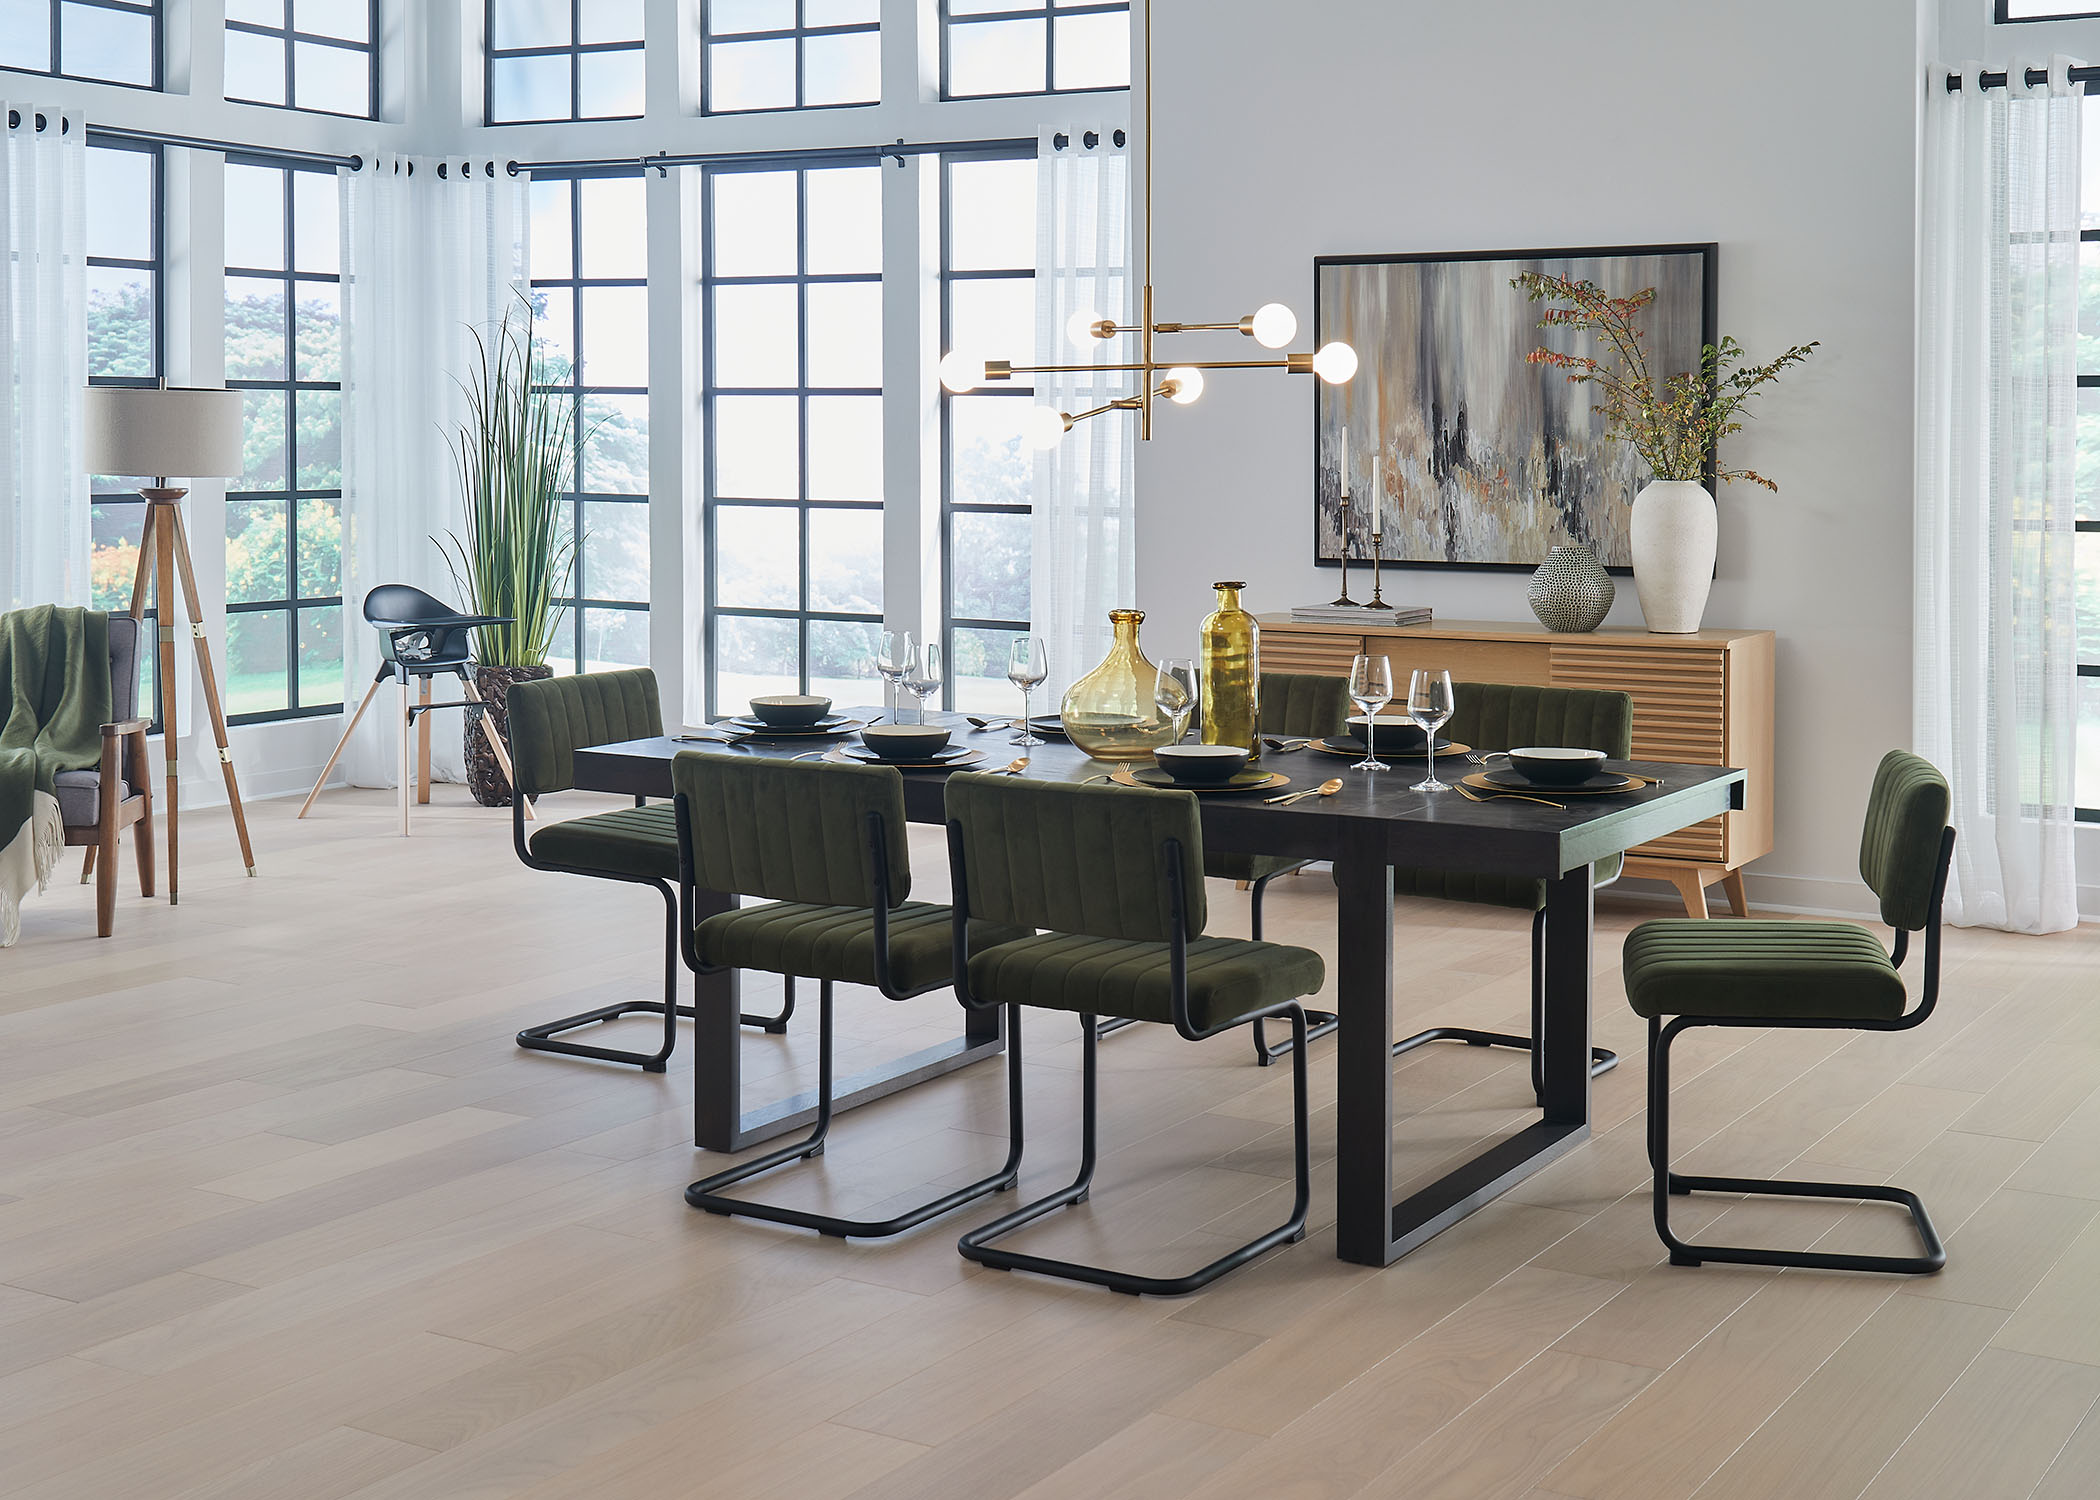 light blonde engineered hardwood floor in dining room with black dining table and black and green dining chairs plus blonde wood credenza and white sheers